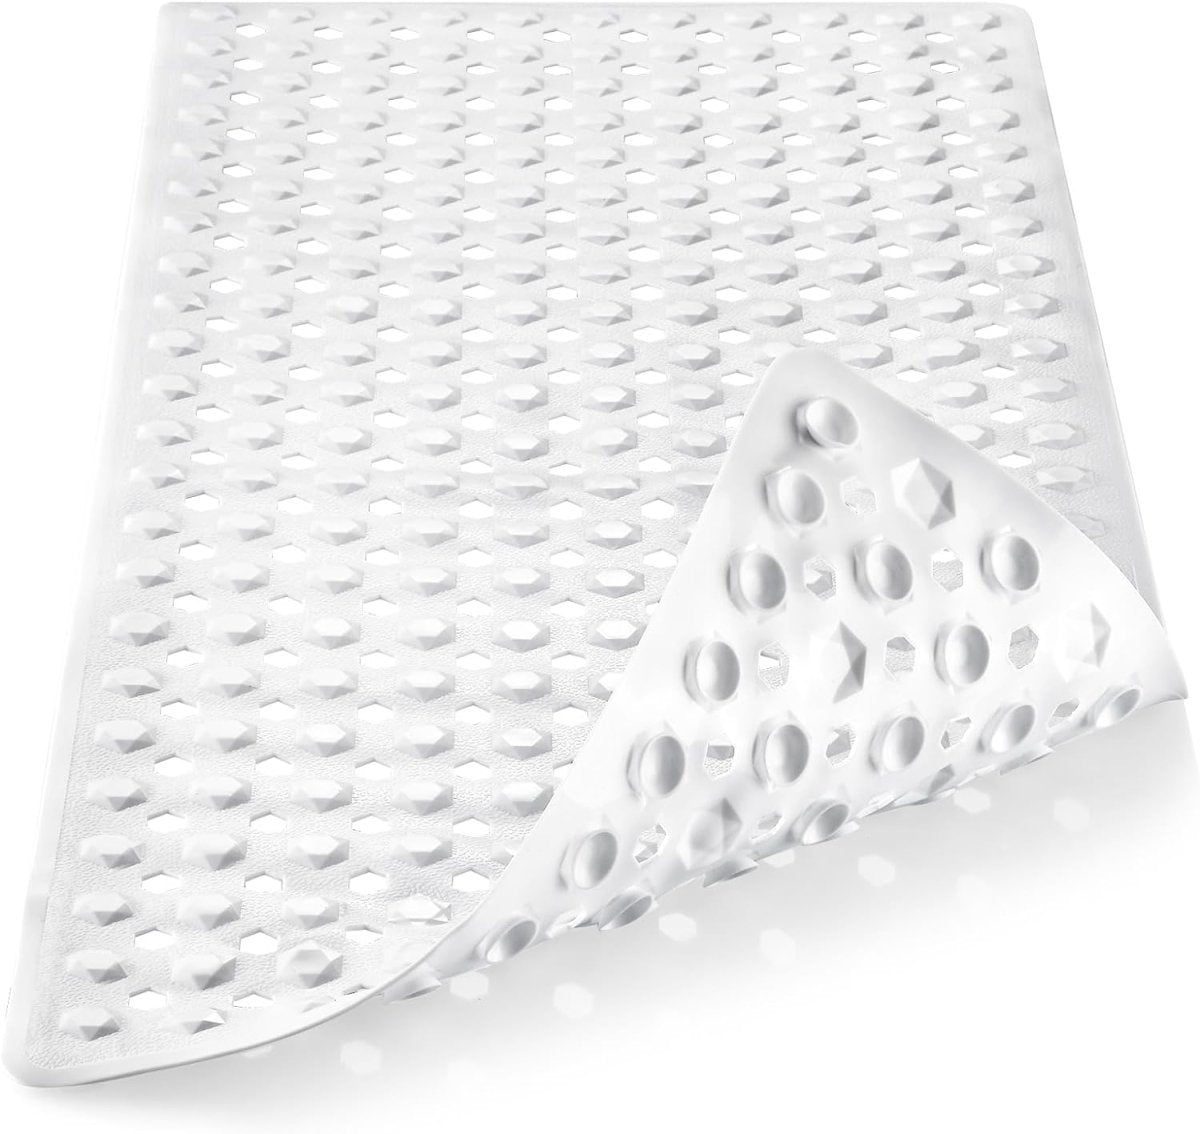 Extra Long Anti-Slip Bathtub Mat for Safety and Comfort – High Quality Vinyl Shower Mat ( White or Clear ) - Slips Away - B0CFTTRF2Q -